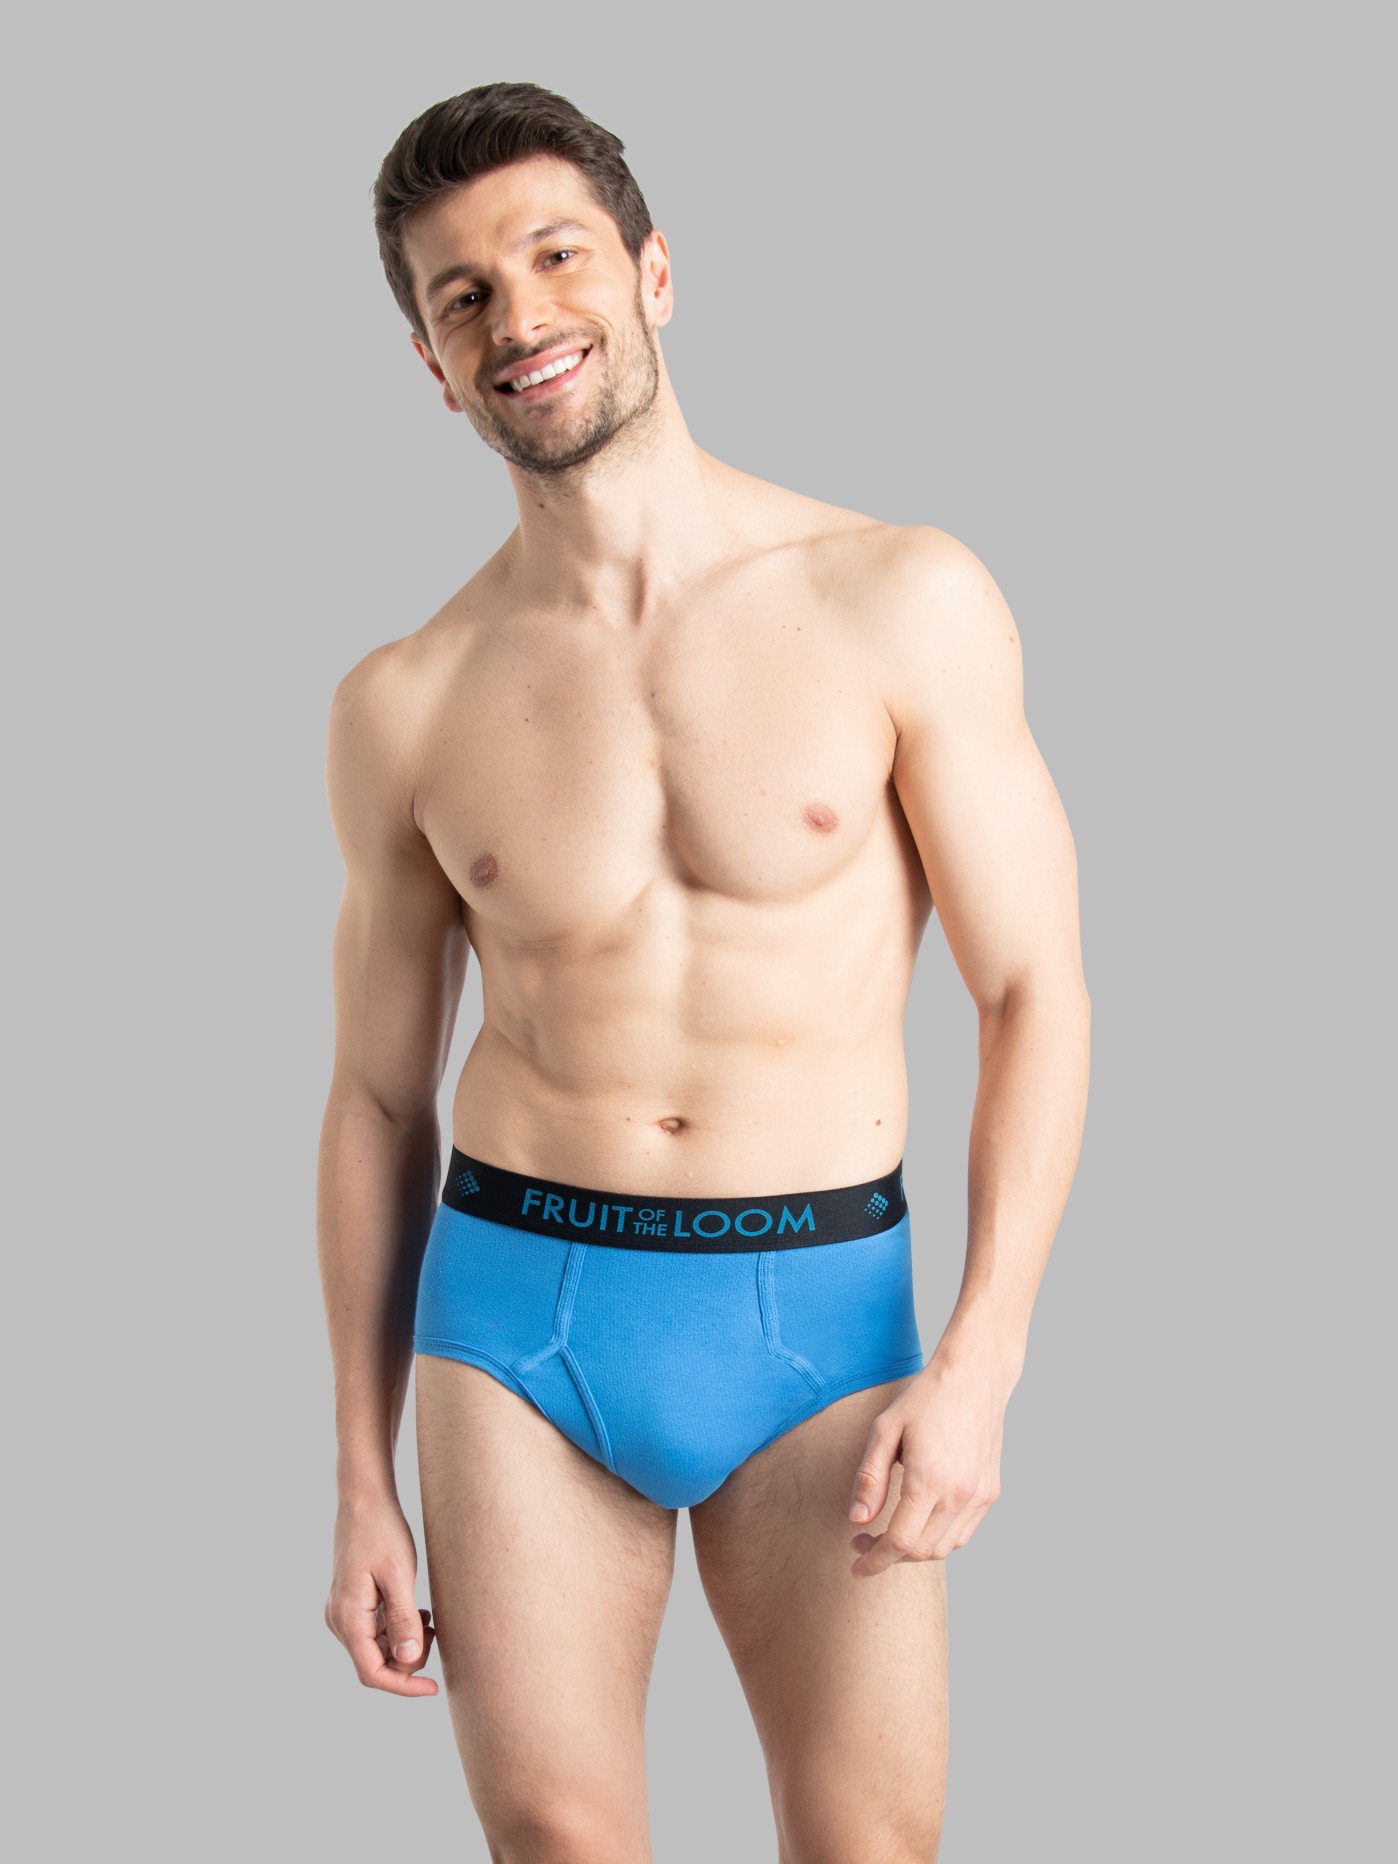 Fruit of the Loom Mens Briefs Underwear Small Blue Black Breathable 5 Pack  New